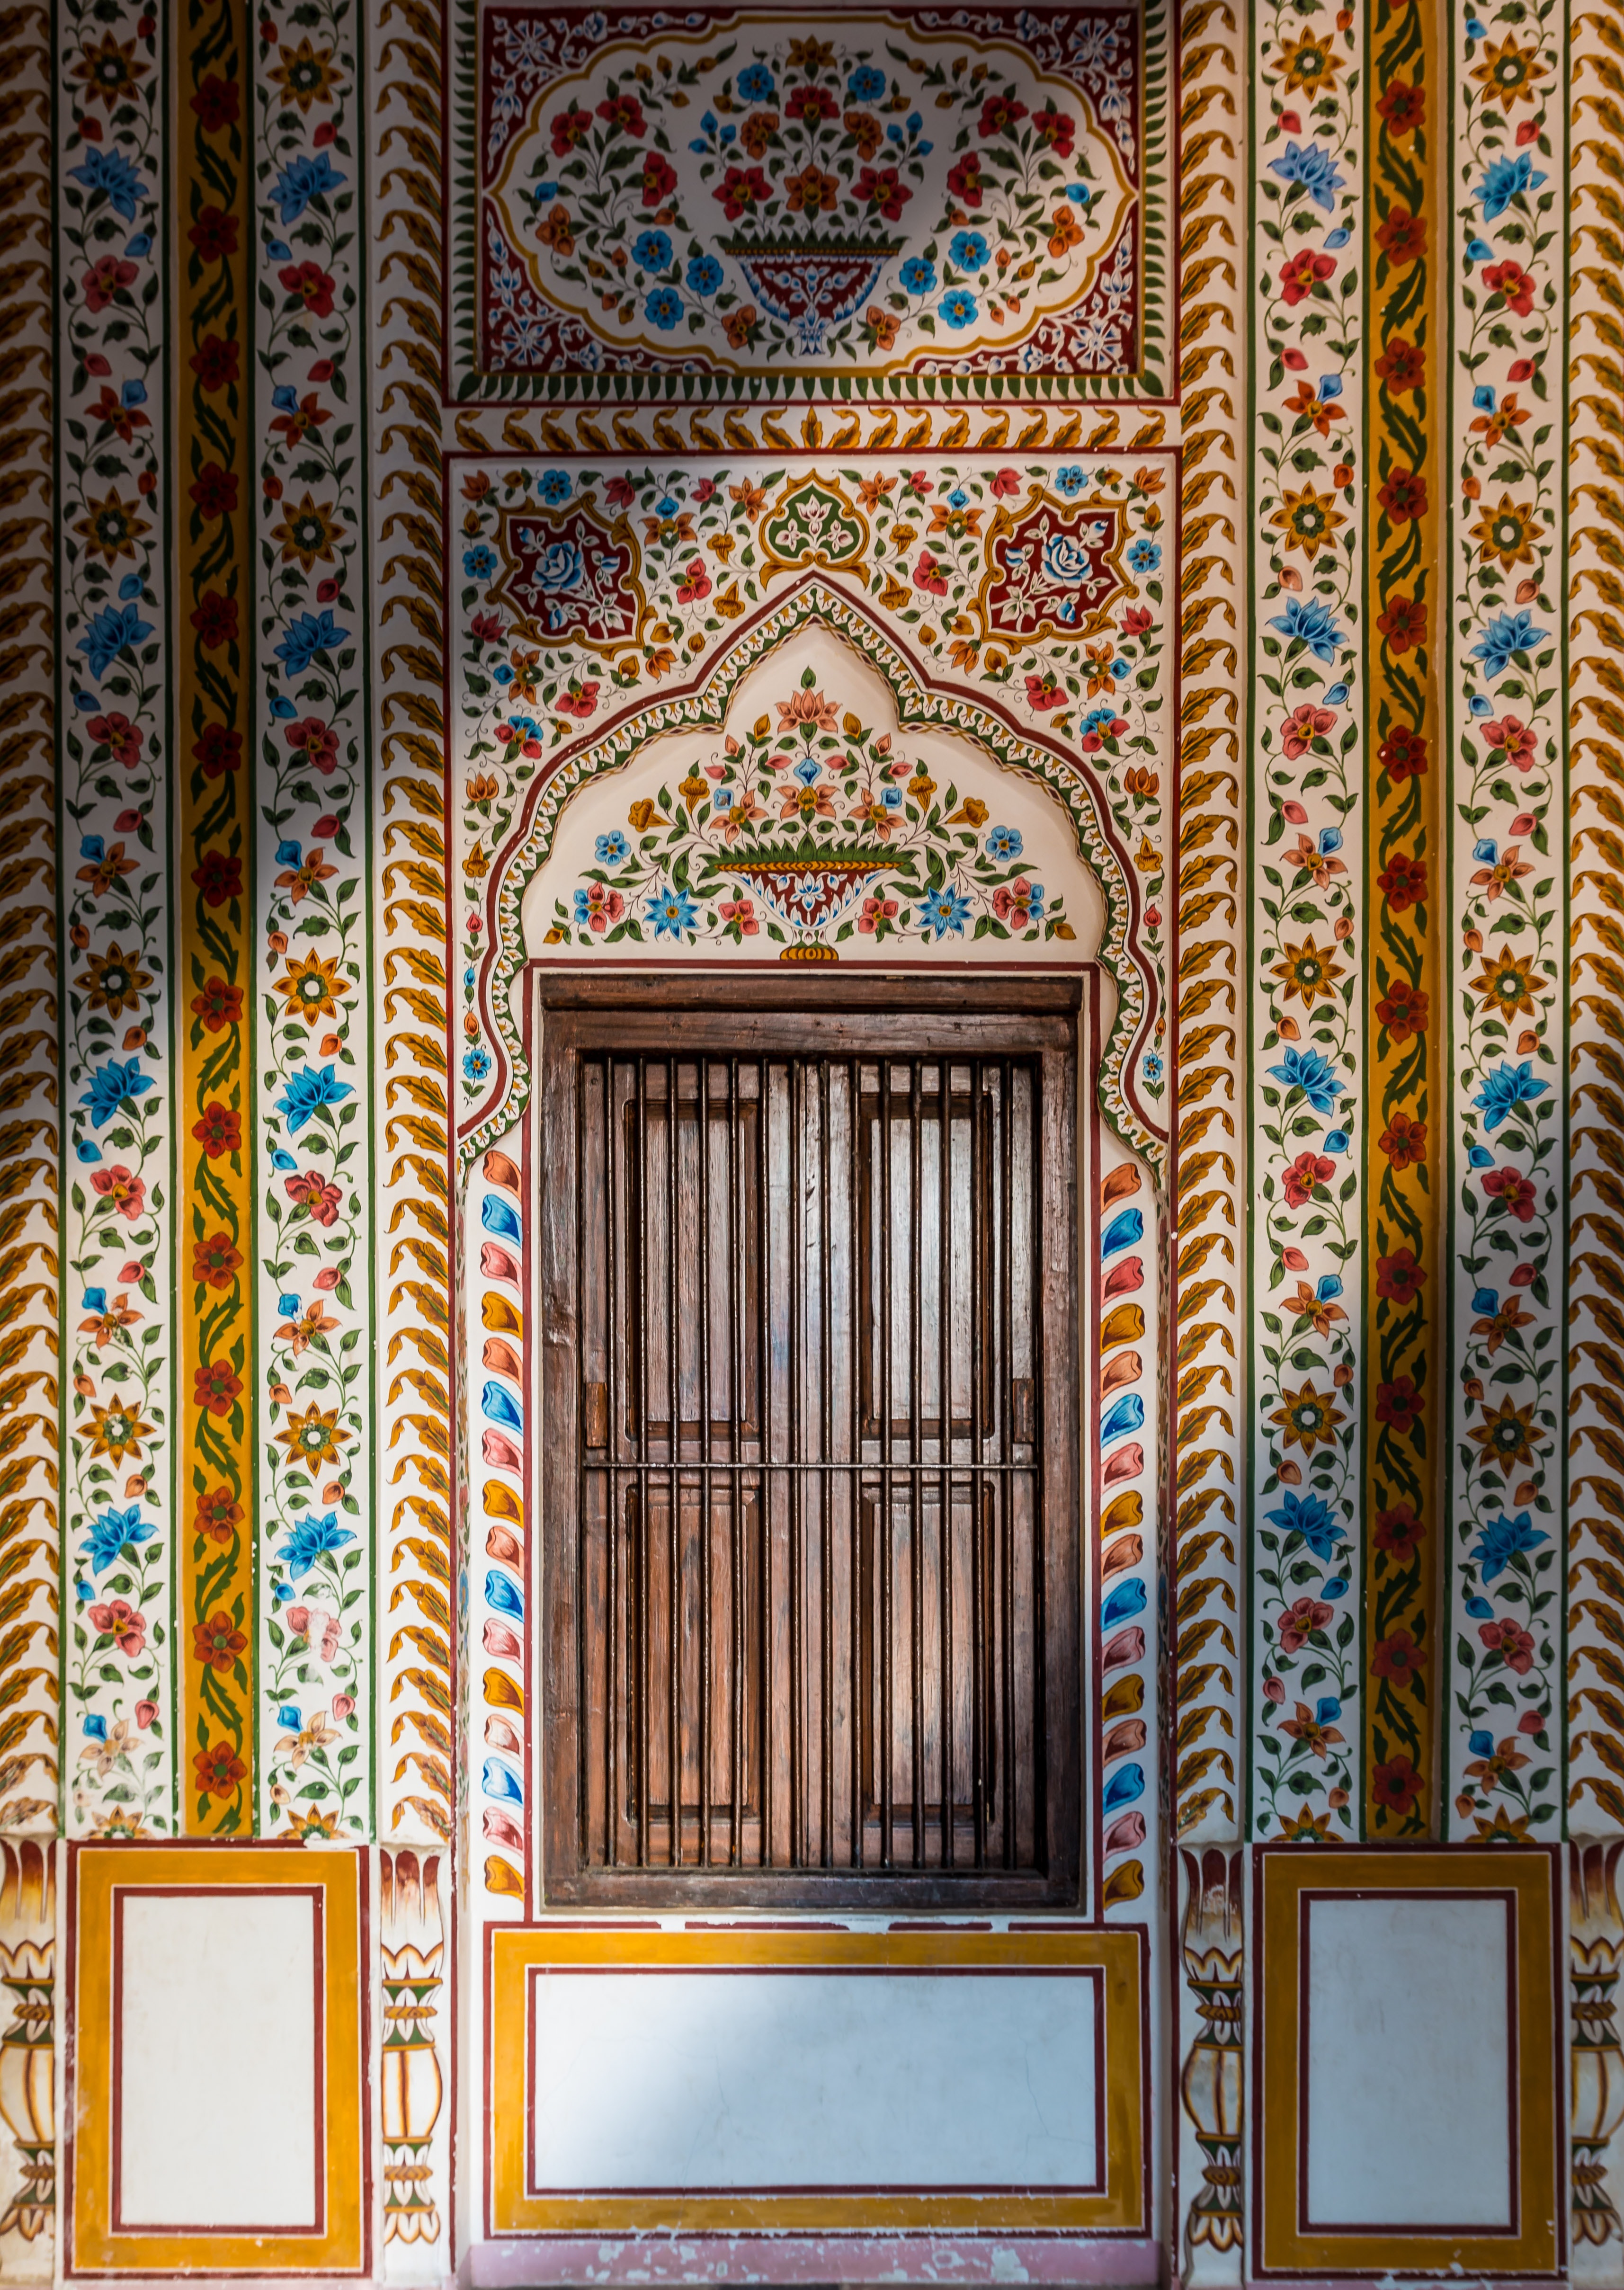 A closed brown wooden door surrounded by floral patterns